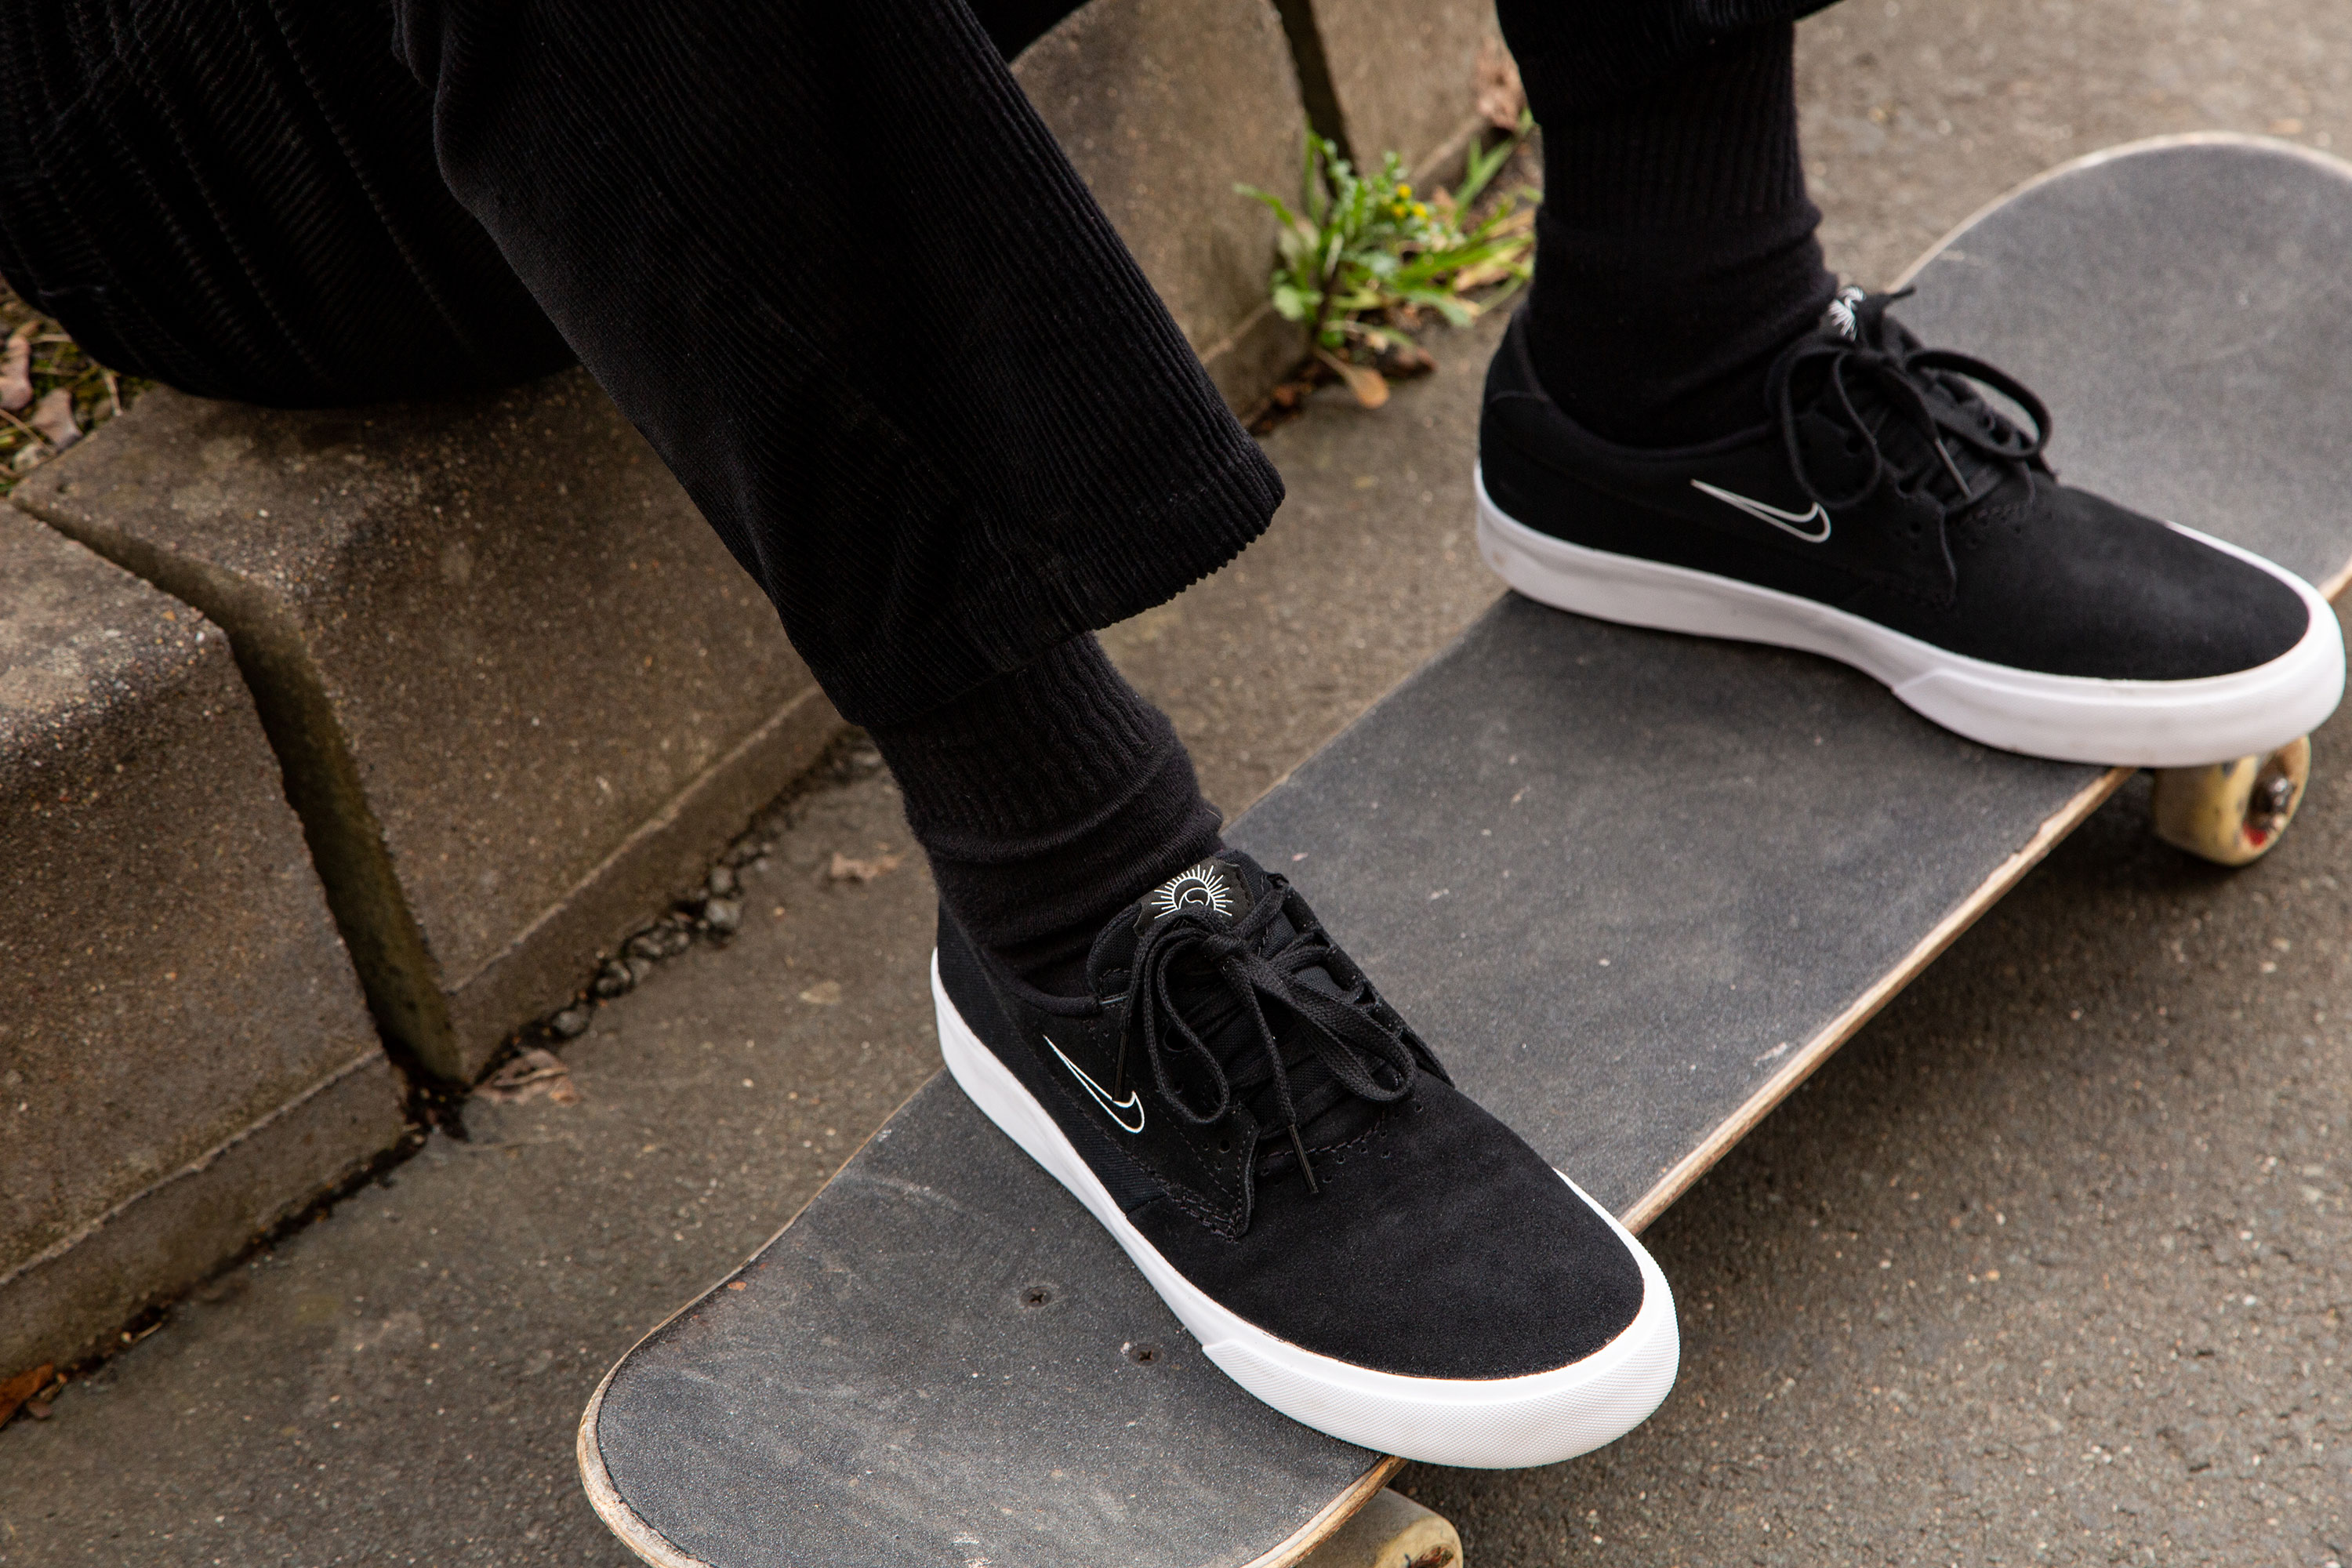 Suede Shoes For Skateboarding Switzerland, SAVE 45% - aveclumiere.com